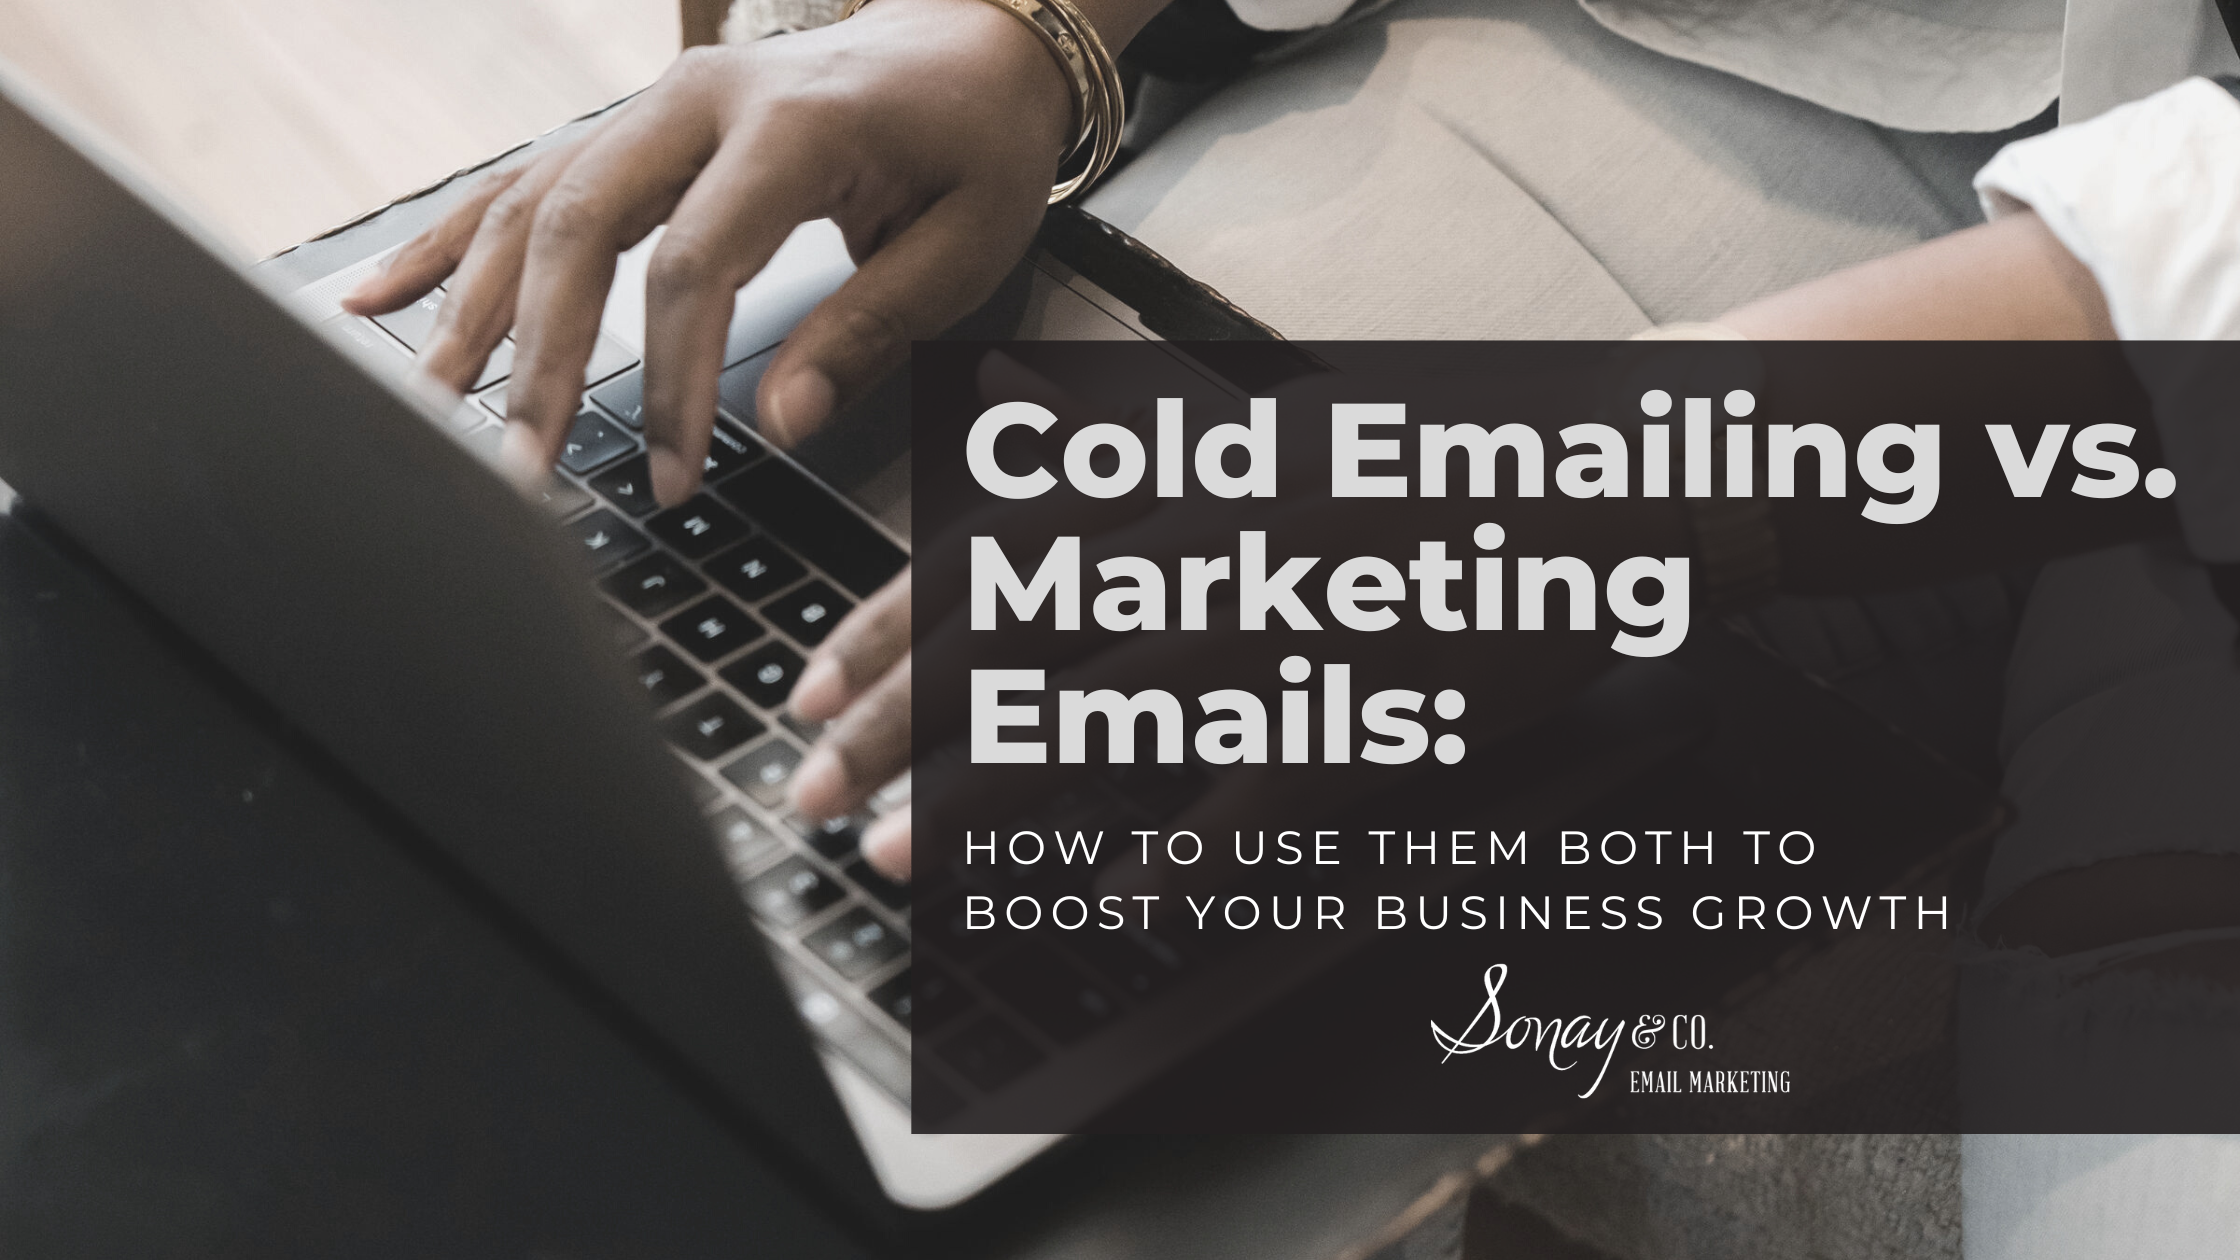 Cold Emailing vs. Marketing Emails: How To Use Them To Boost Your Business Growth